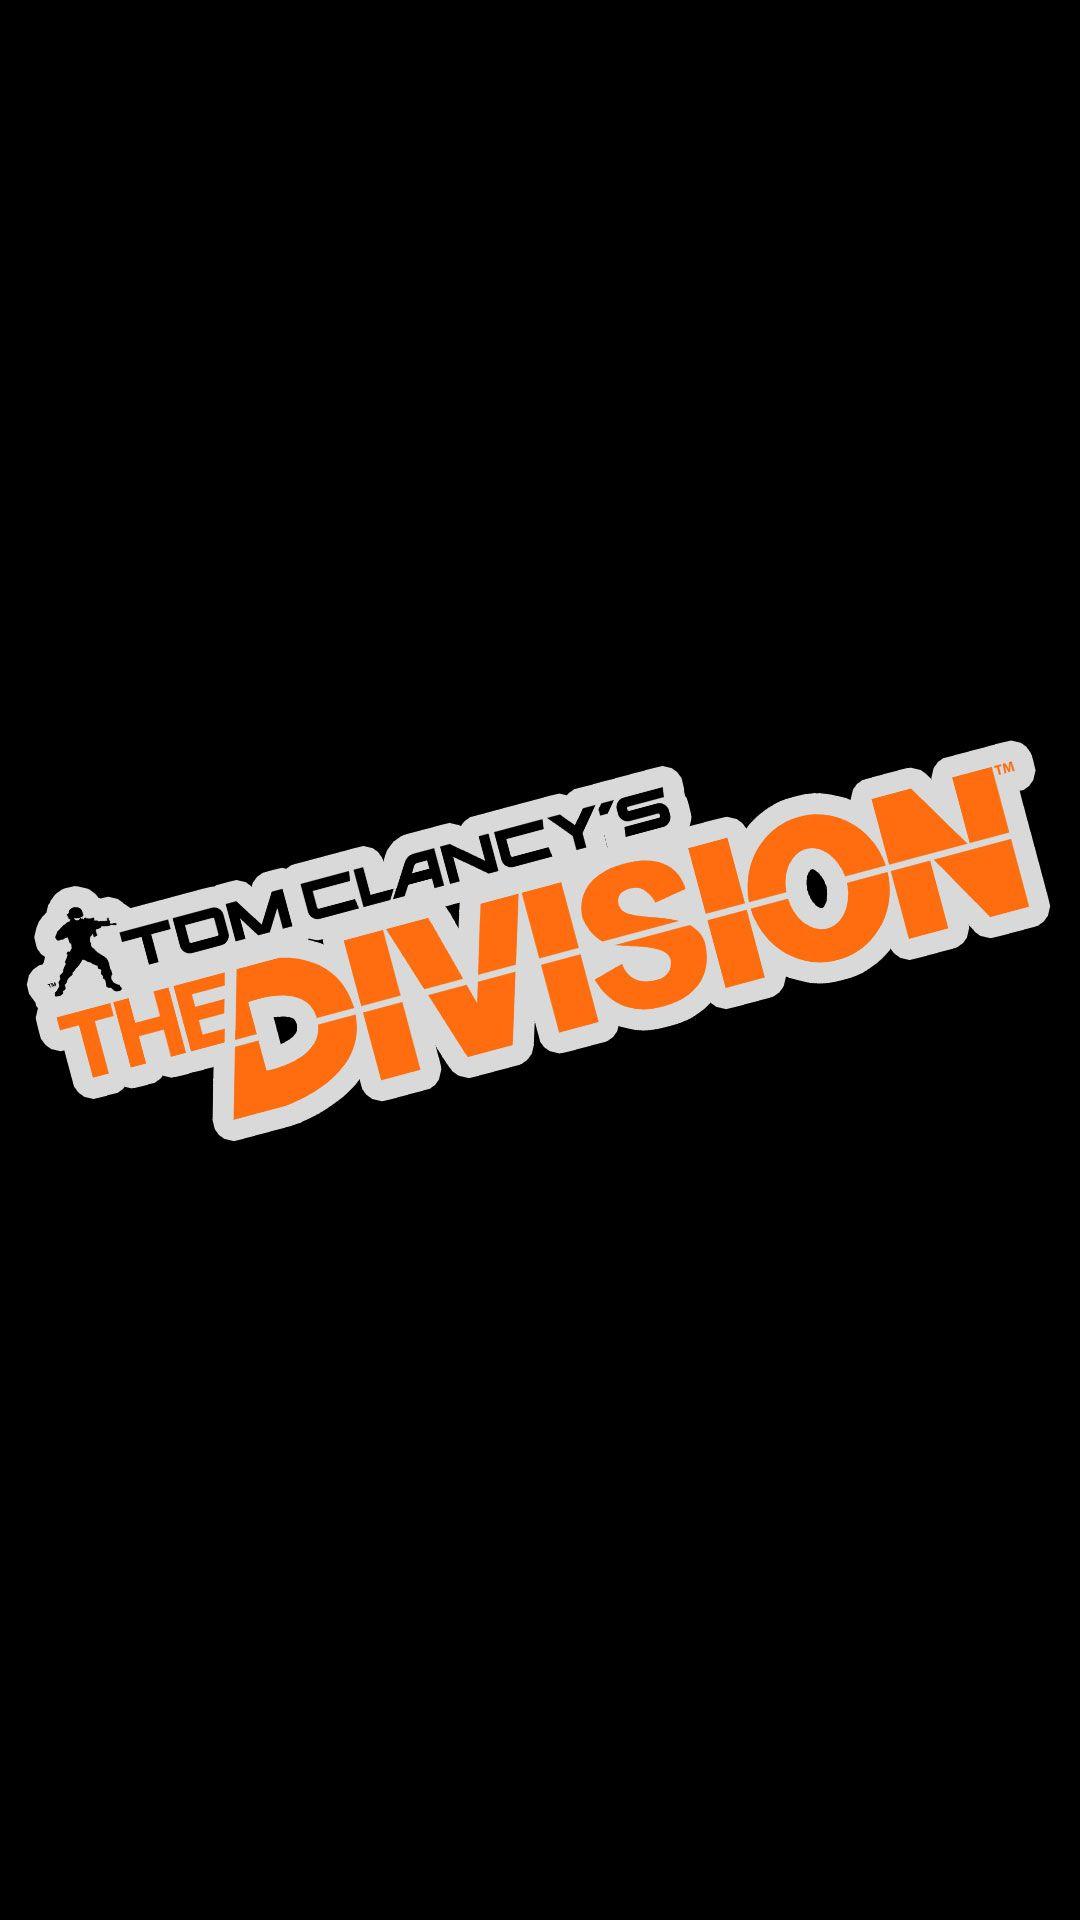 Tom Clancy Division Logo - The Division Logo Wallpaper iPhone 6 Plus | Games Wallpaper for iPhone